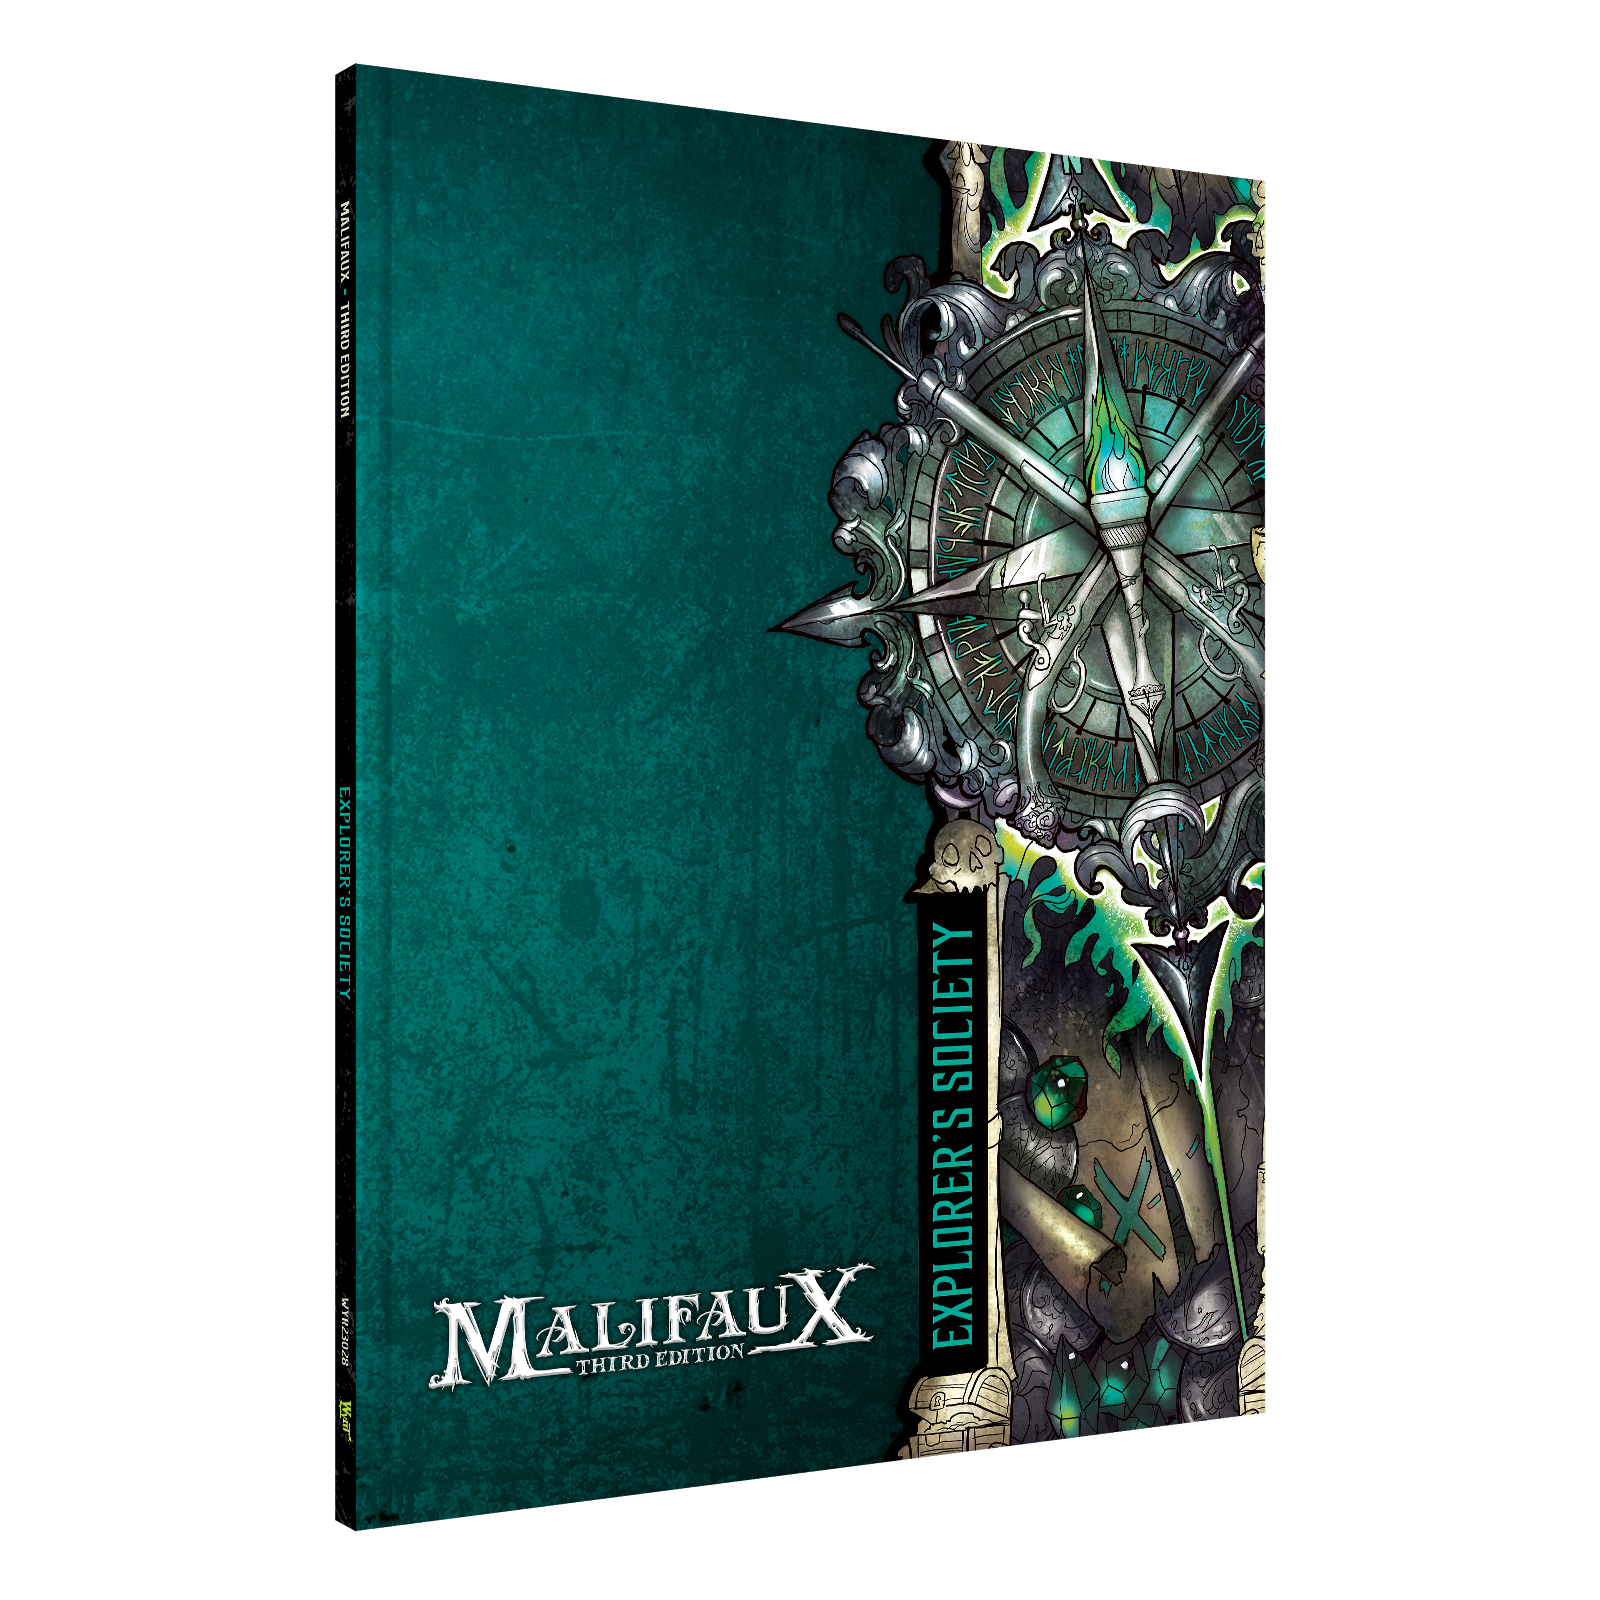 Malifaux new releases in stock!